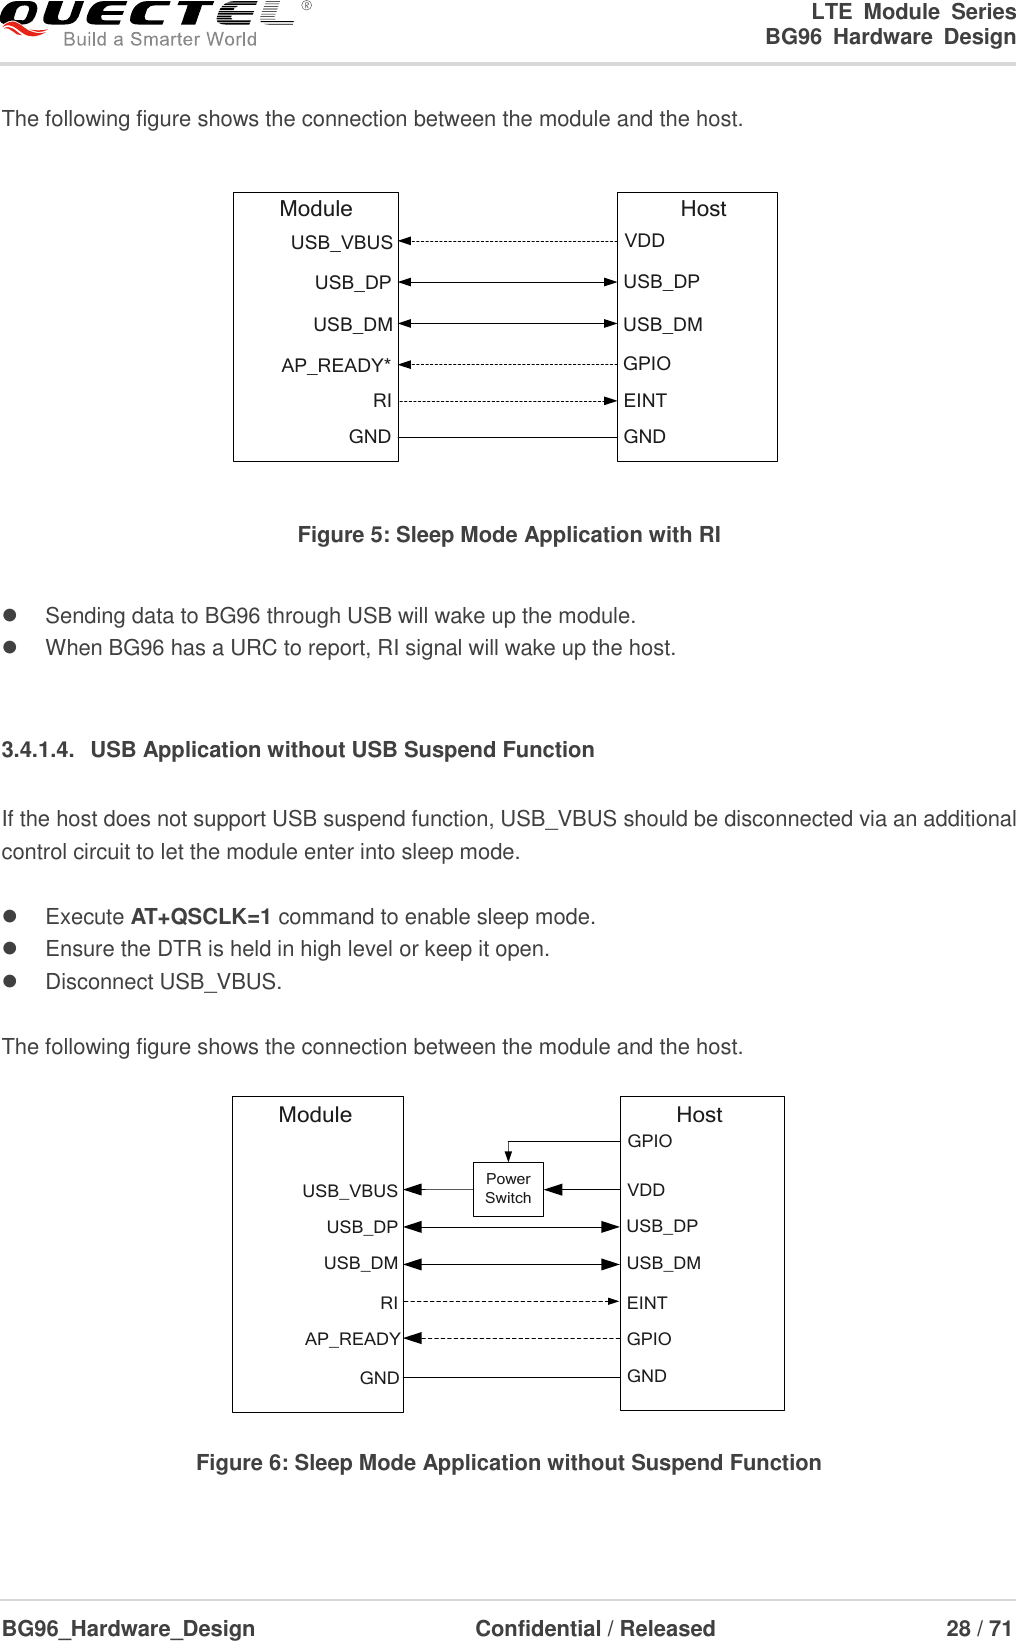 LTE  Module  Series                                                  BG96  Hardware  Design  BG96_Hardware_Design                              Confidential / Released                             28 / 71    The following figure shows the connection between the module and the host. USB_VBUSUSB_DPUSB_DMAP_READY*VDDUSB_DPUSB_DMGPIOModule HostGND GNDRI EINT Figure 5: Sleep Mode Application with RI    Sending data to BG96 through USB will wake up the module.     When BG96 has a URC to report, RI signal will wake up the host.    3.4.1.4.  USB Application without USB Suspend Function If the host does not support USB suspend function, USB_VBUS should be disconnected via an additional control circuit to let the module enter into sleep mode.    Execute AT+QSCLK=1 command to enable sleep mode.   Ensure the DTR is held in high level or keep it open.   Disconnect USB_VBUS.  The following figure shows the connection between the module and the host. USB_VBUSUSB_DPUSB_DMAP_READYVDDUSB_DPUSB_DMGPIOModule HostRI EINTPower SwitchGPIOGND GND Figure 6: Sleep Mode Application without Suspend Function  